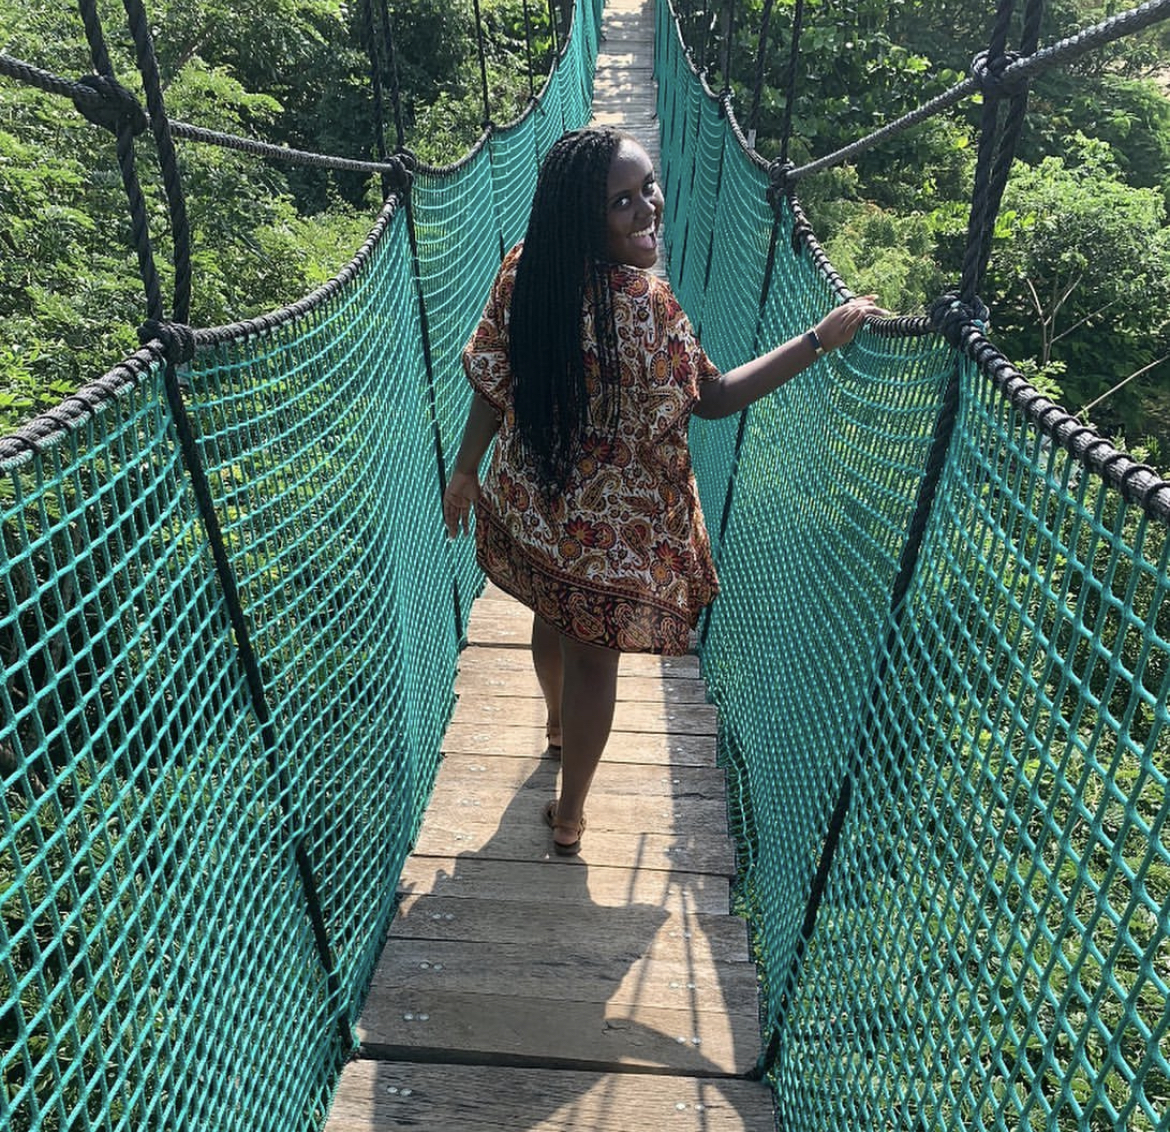 Blogger Christina Jane on a canopy walk in Accra.